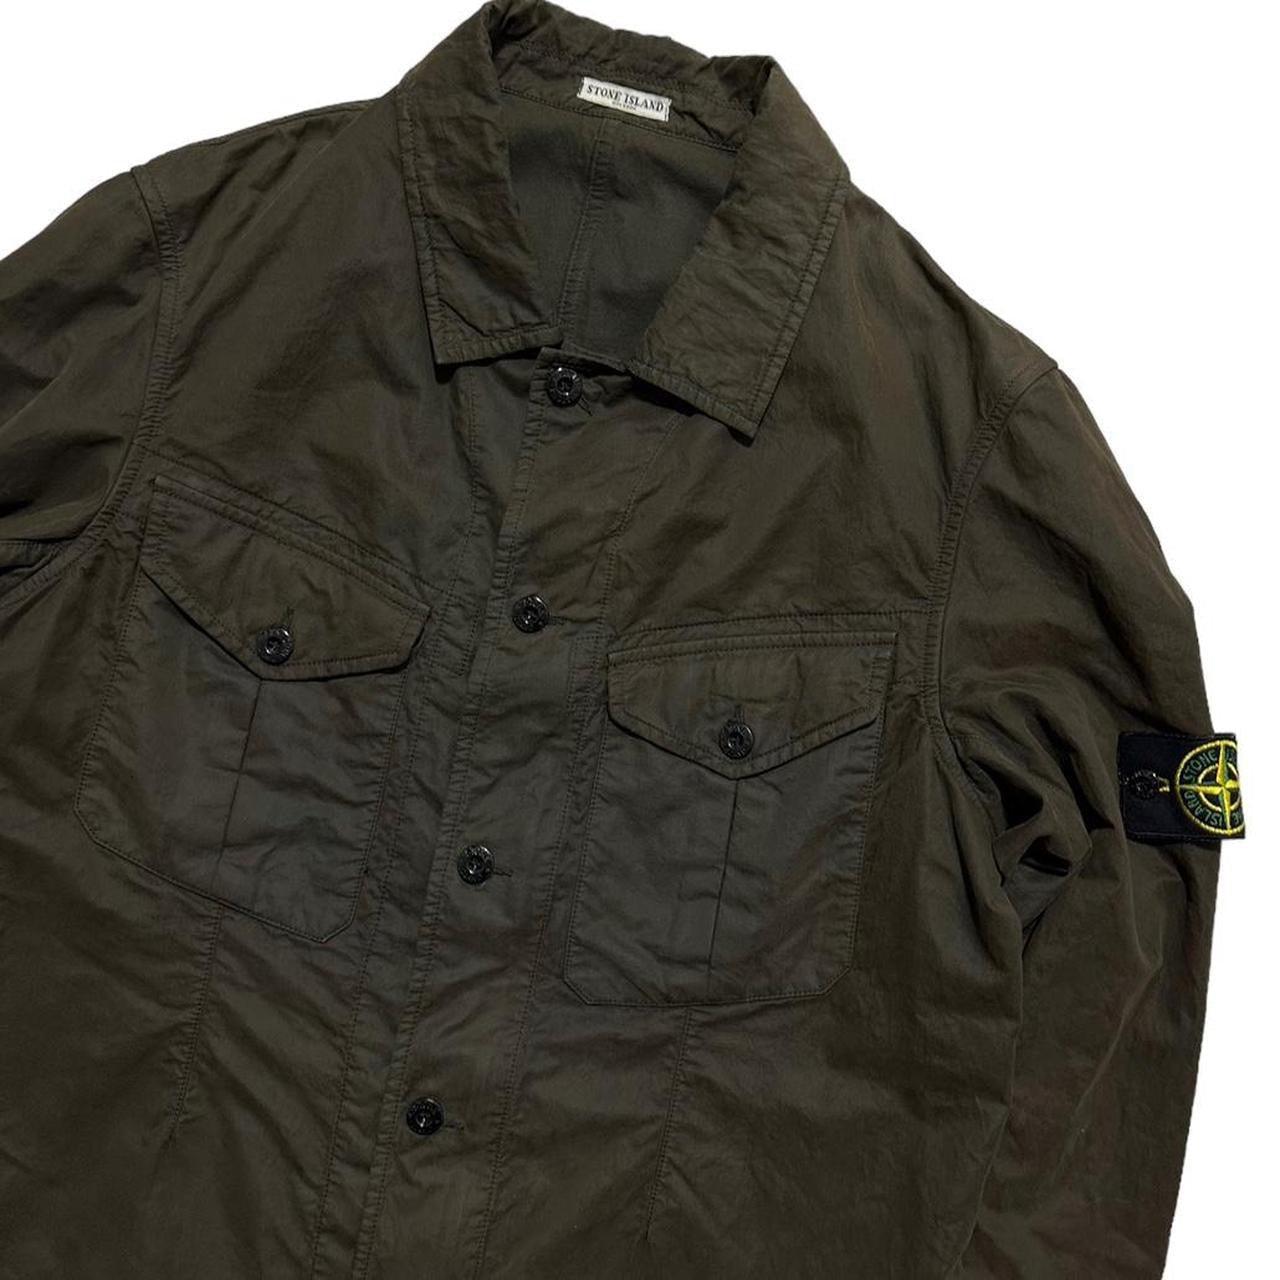 Stone Island Brown Double Pocket Overshirt - Known Source